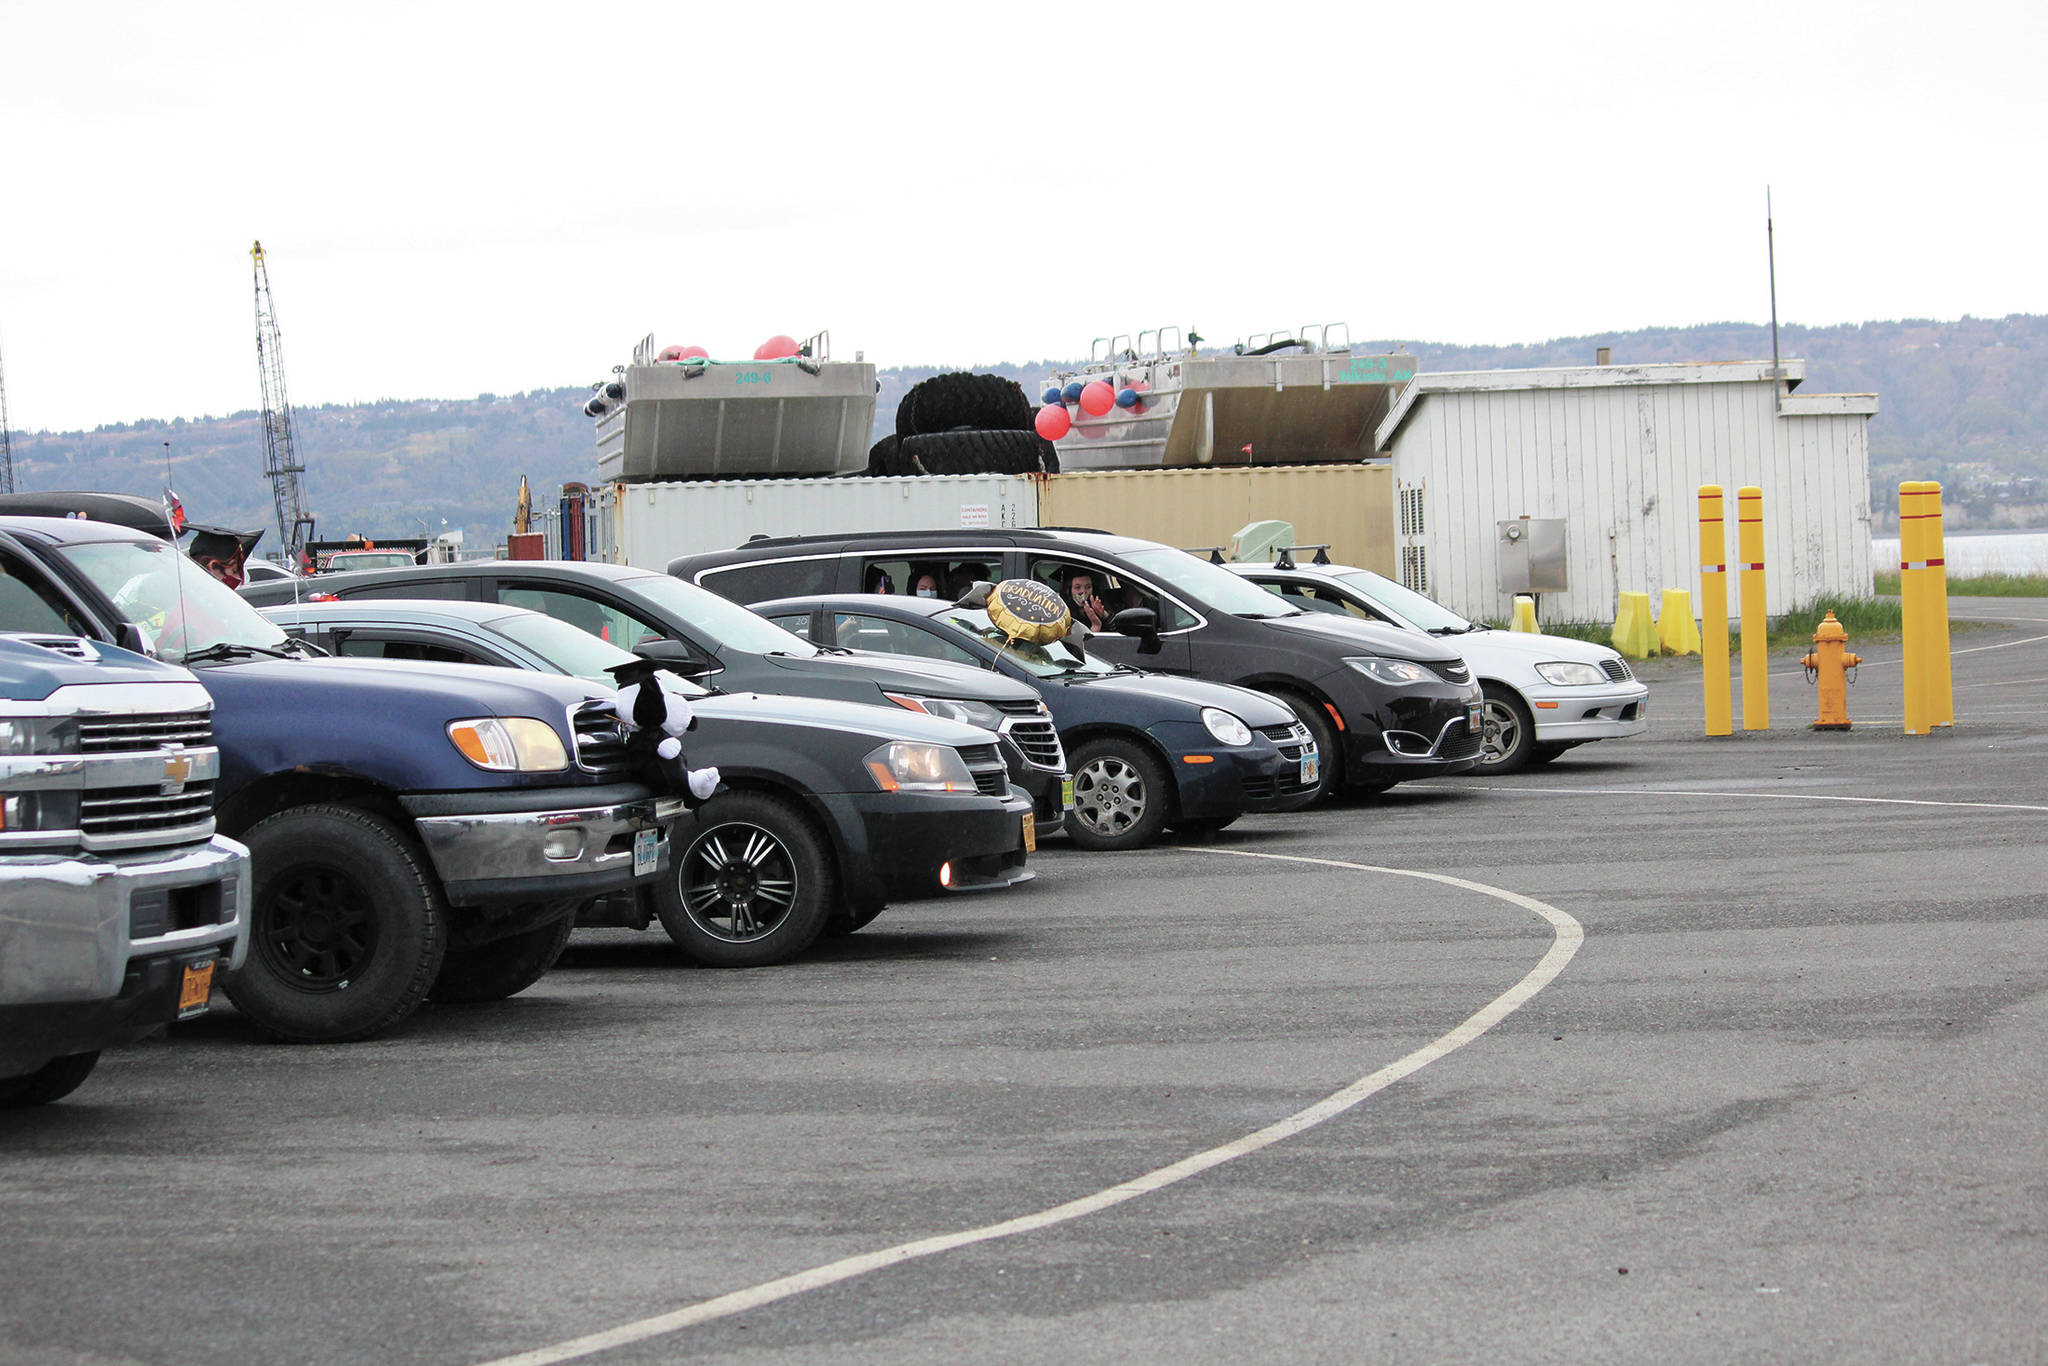 Vehicles wait in line with graduates inside them during a commencement ceremony for Homer Flex School on Monday, May 18, 2020 at the Homer Harbor in Homer, Alaska. Students got out of the vehicles to collect their diplomas and get photos before returning. The program was pre-recorded and played on public radio. (Photo by Megan Pacer/Homer News)